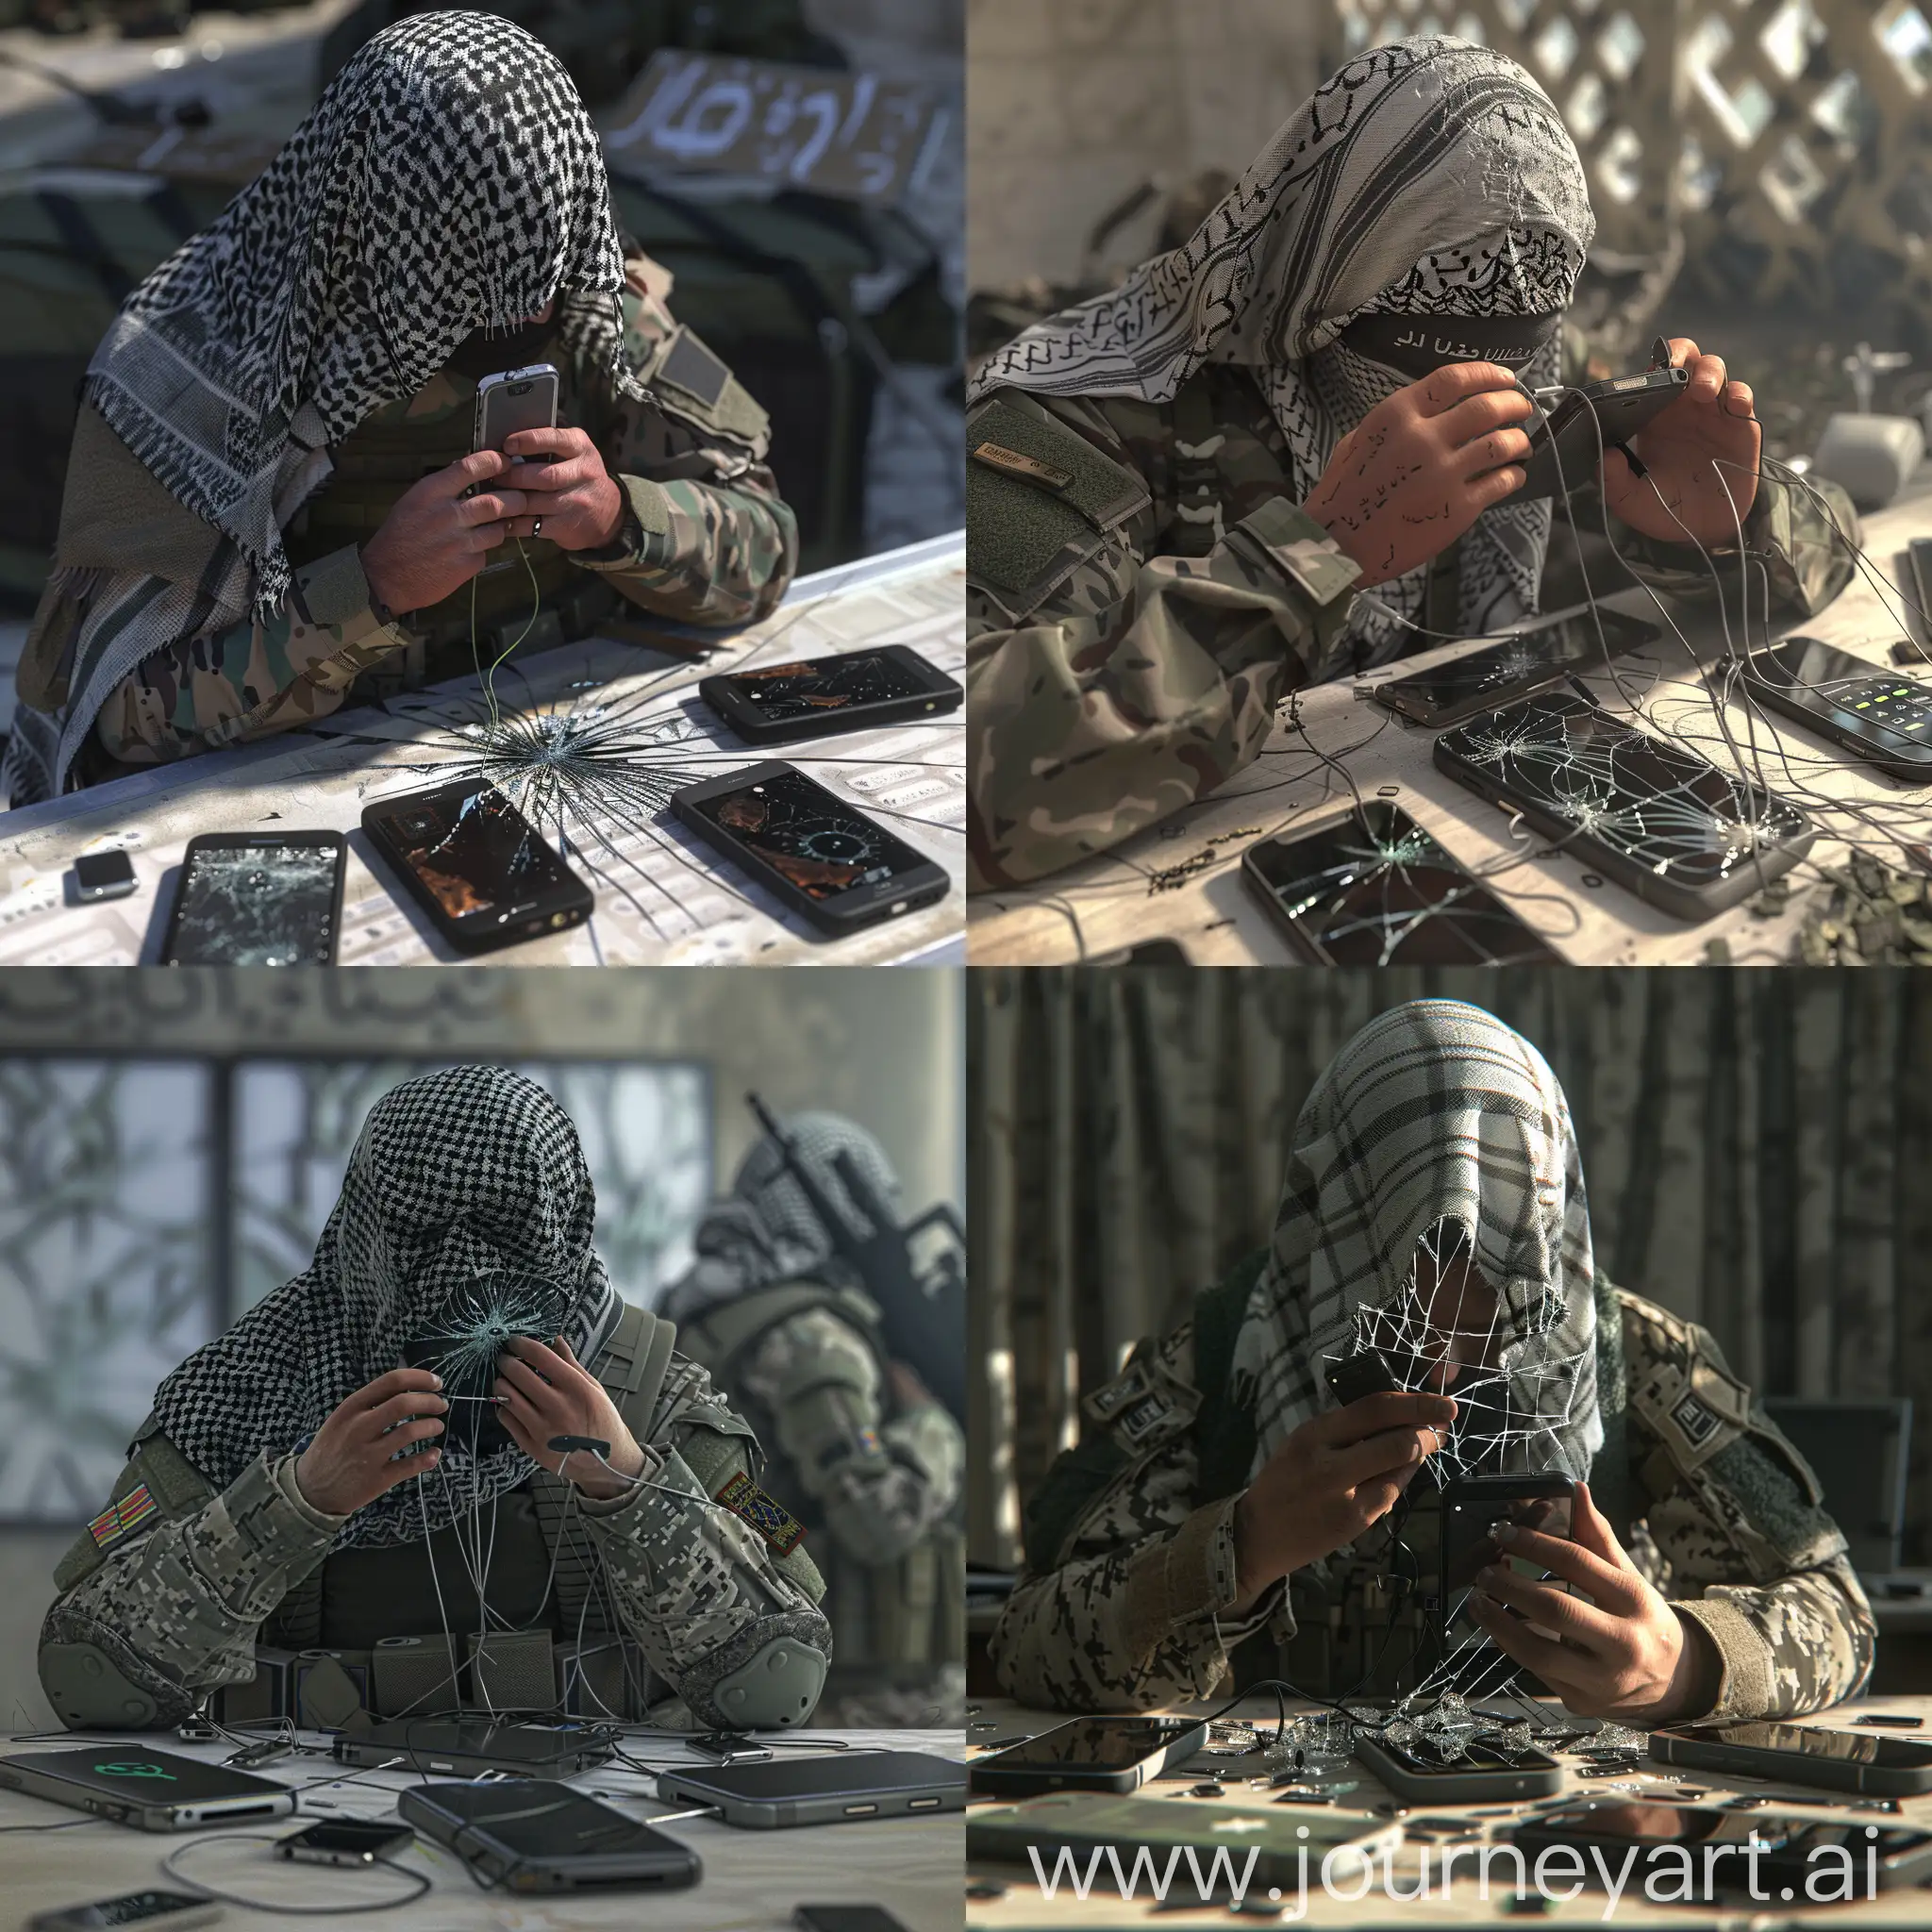 Abu Ubaida, spokesman for the Al-Qassam Brigades, is repairing phones. He is wearing a military uniform and his face is covered with a Palestinian shawl. Phones are on a table, 3D Style، Broken phone background